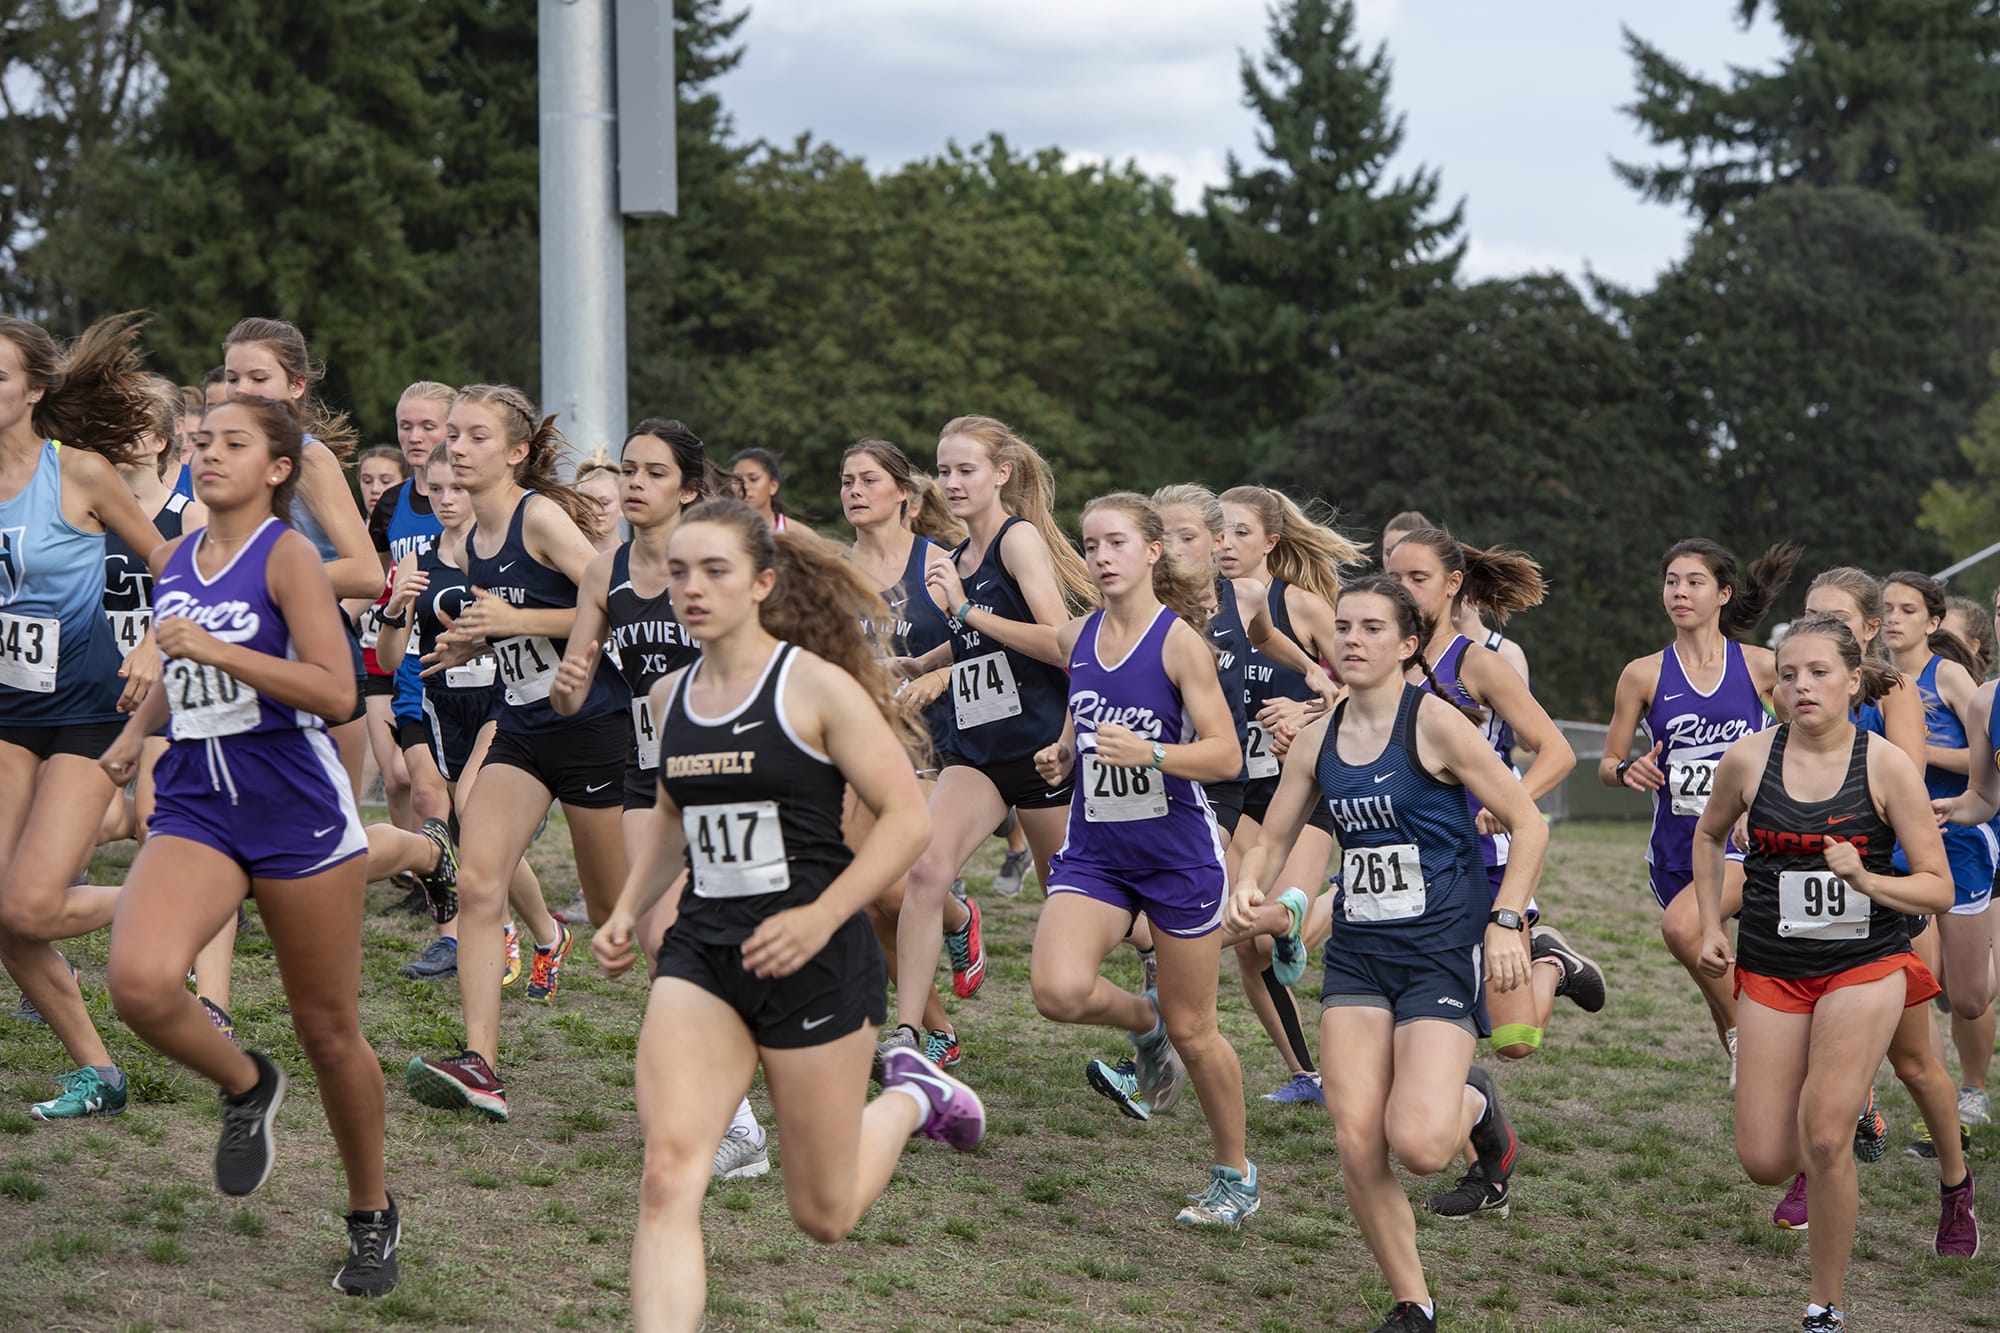 Girls varsity participants take off from the starting line during the Steve Maas Hudson's Bay Run-A-Ree cross country meet at Hudson's Bay High School on Friday afternoon, September 13, 2019.